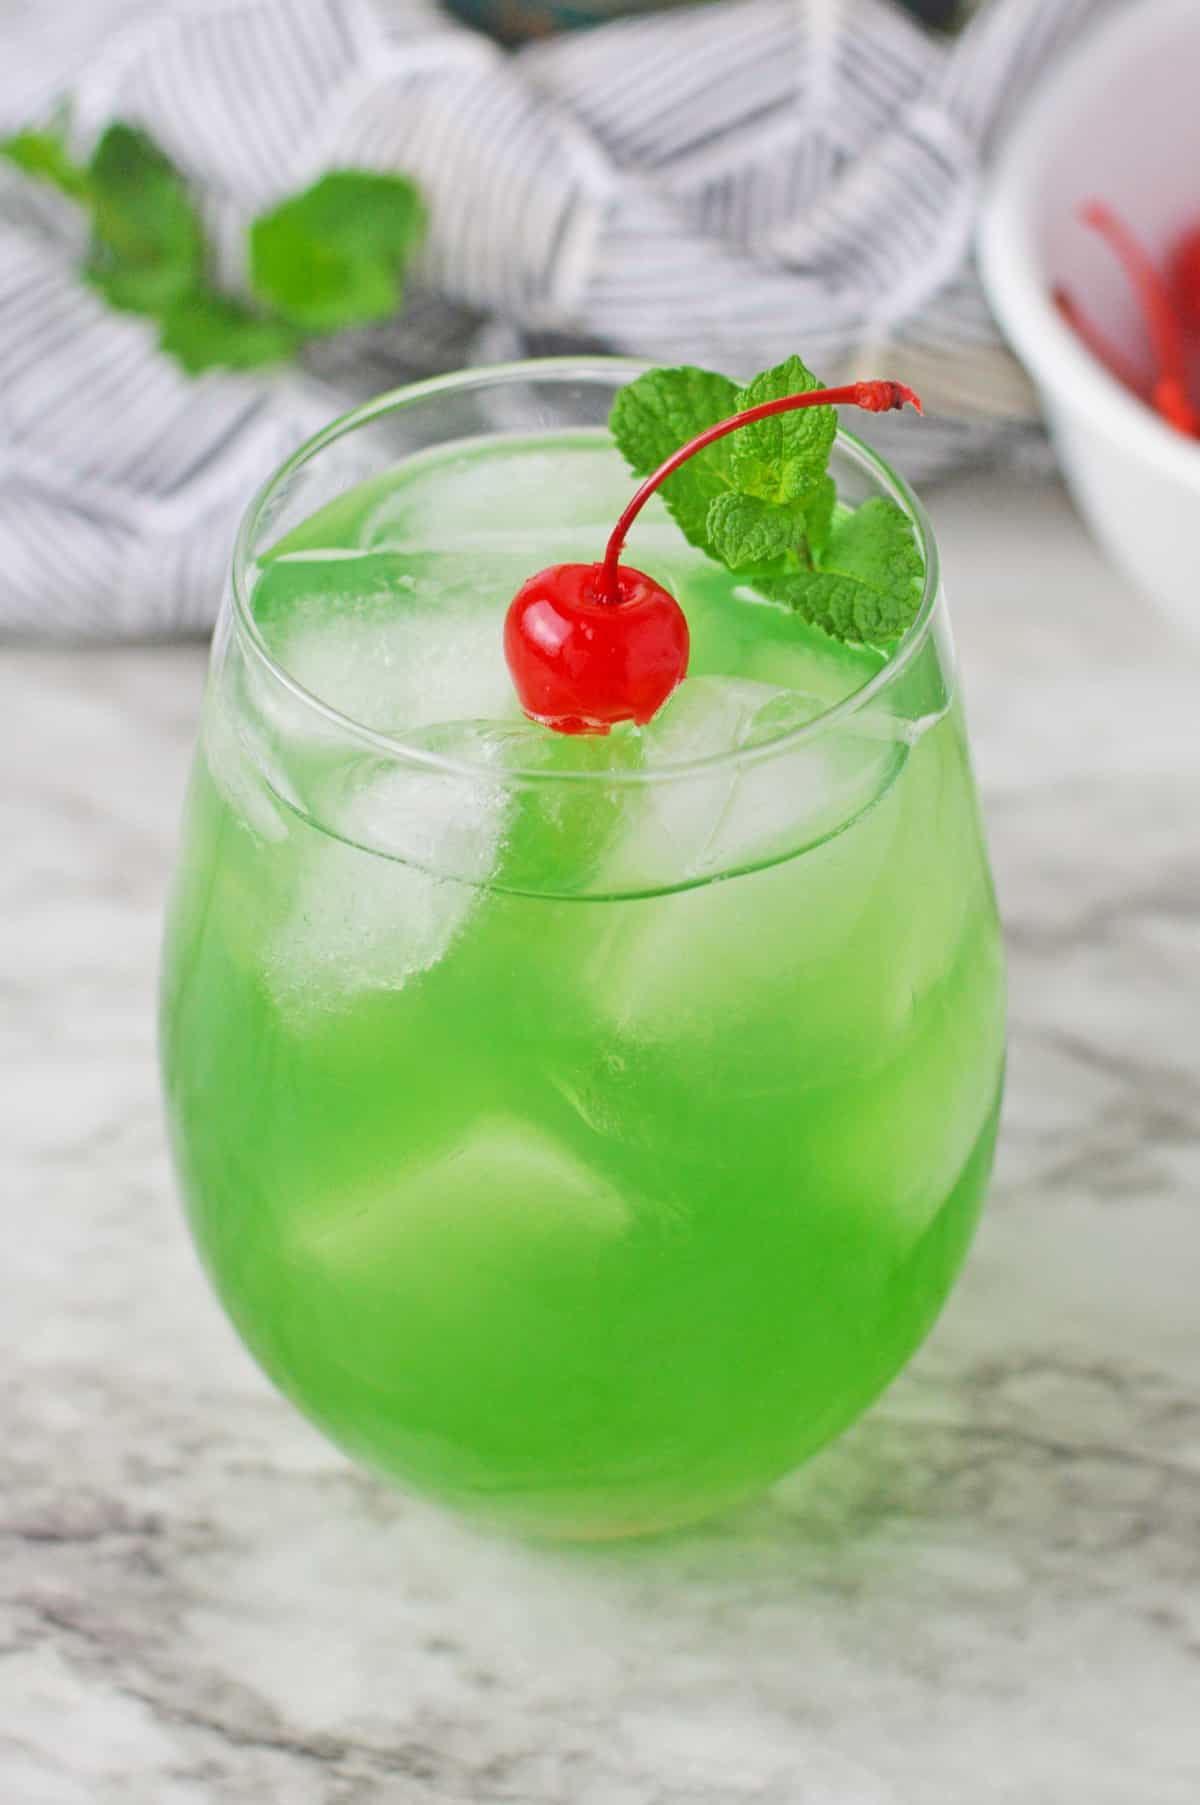 Green cocktail garnished with maraschino cherry and fresh mint.